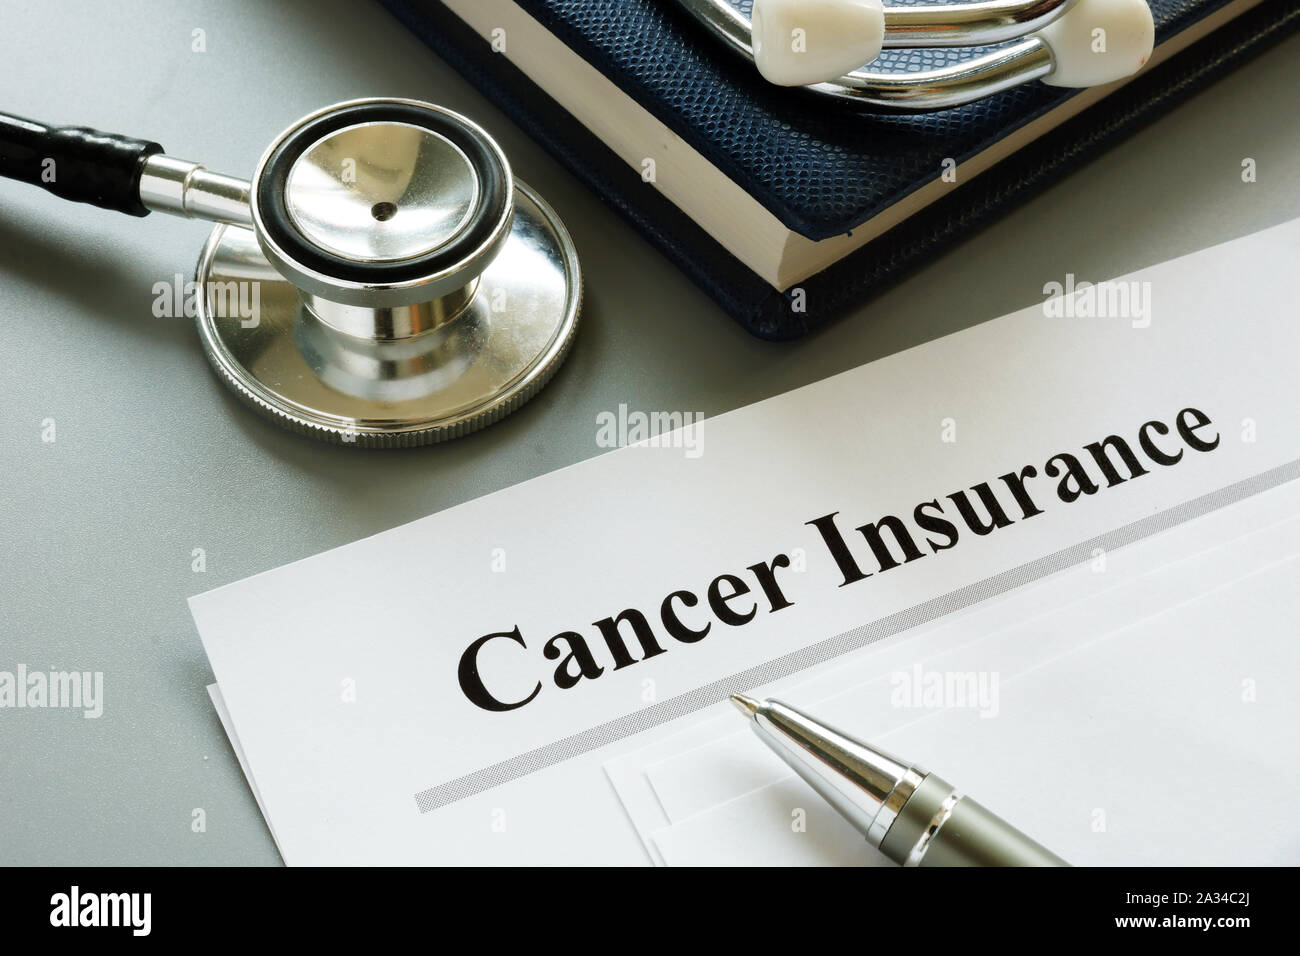 Cancer Insurance policy and stethoscope on a desk. Stock Photo